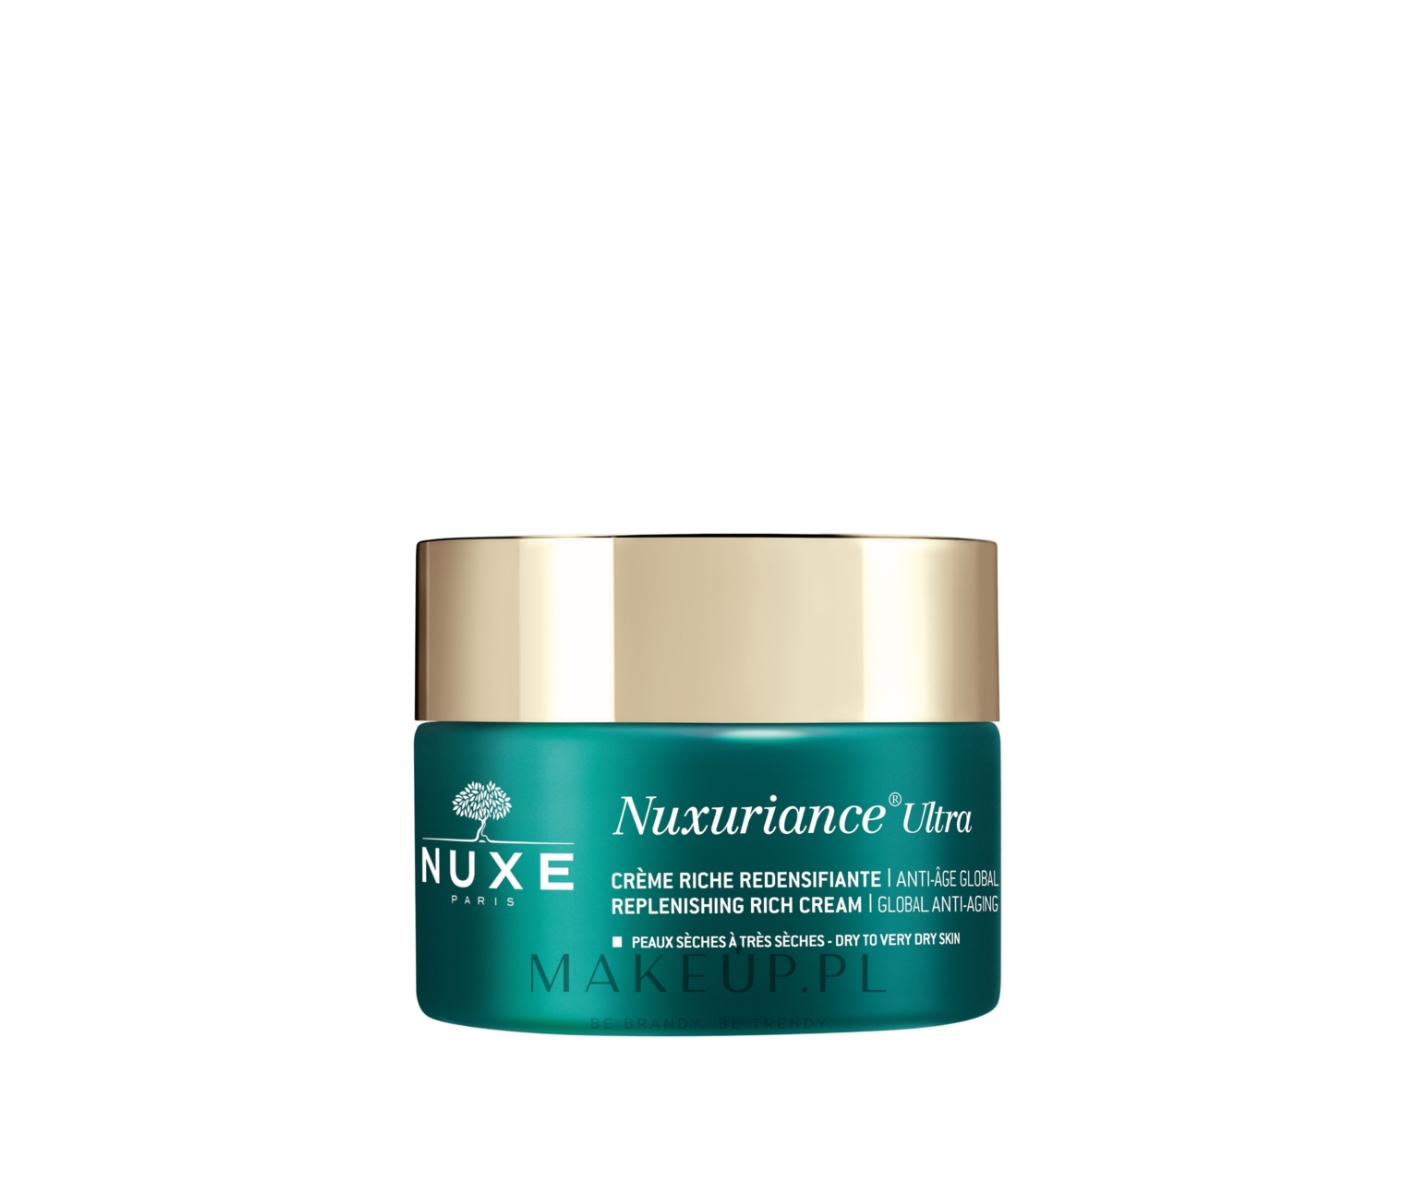 Nuxe, Nuxuriance Ultra